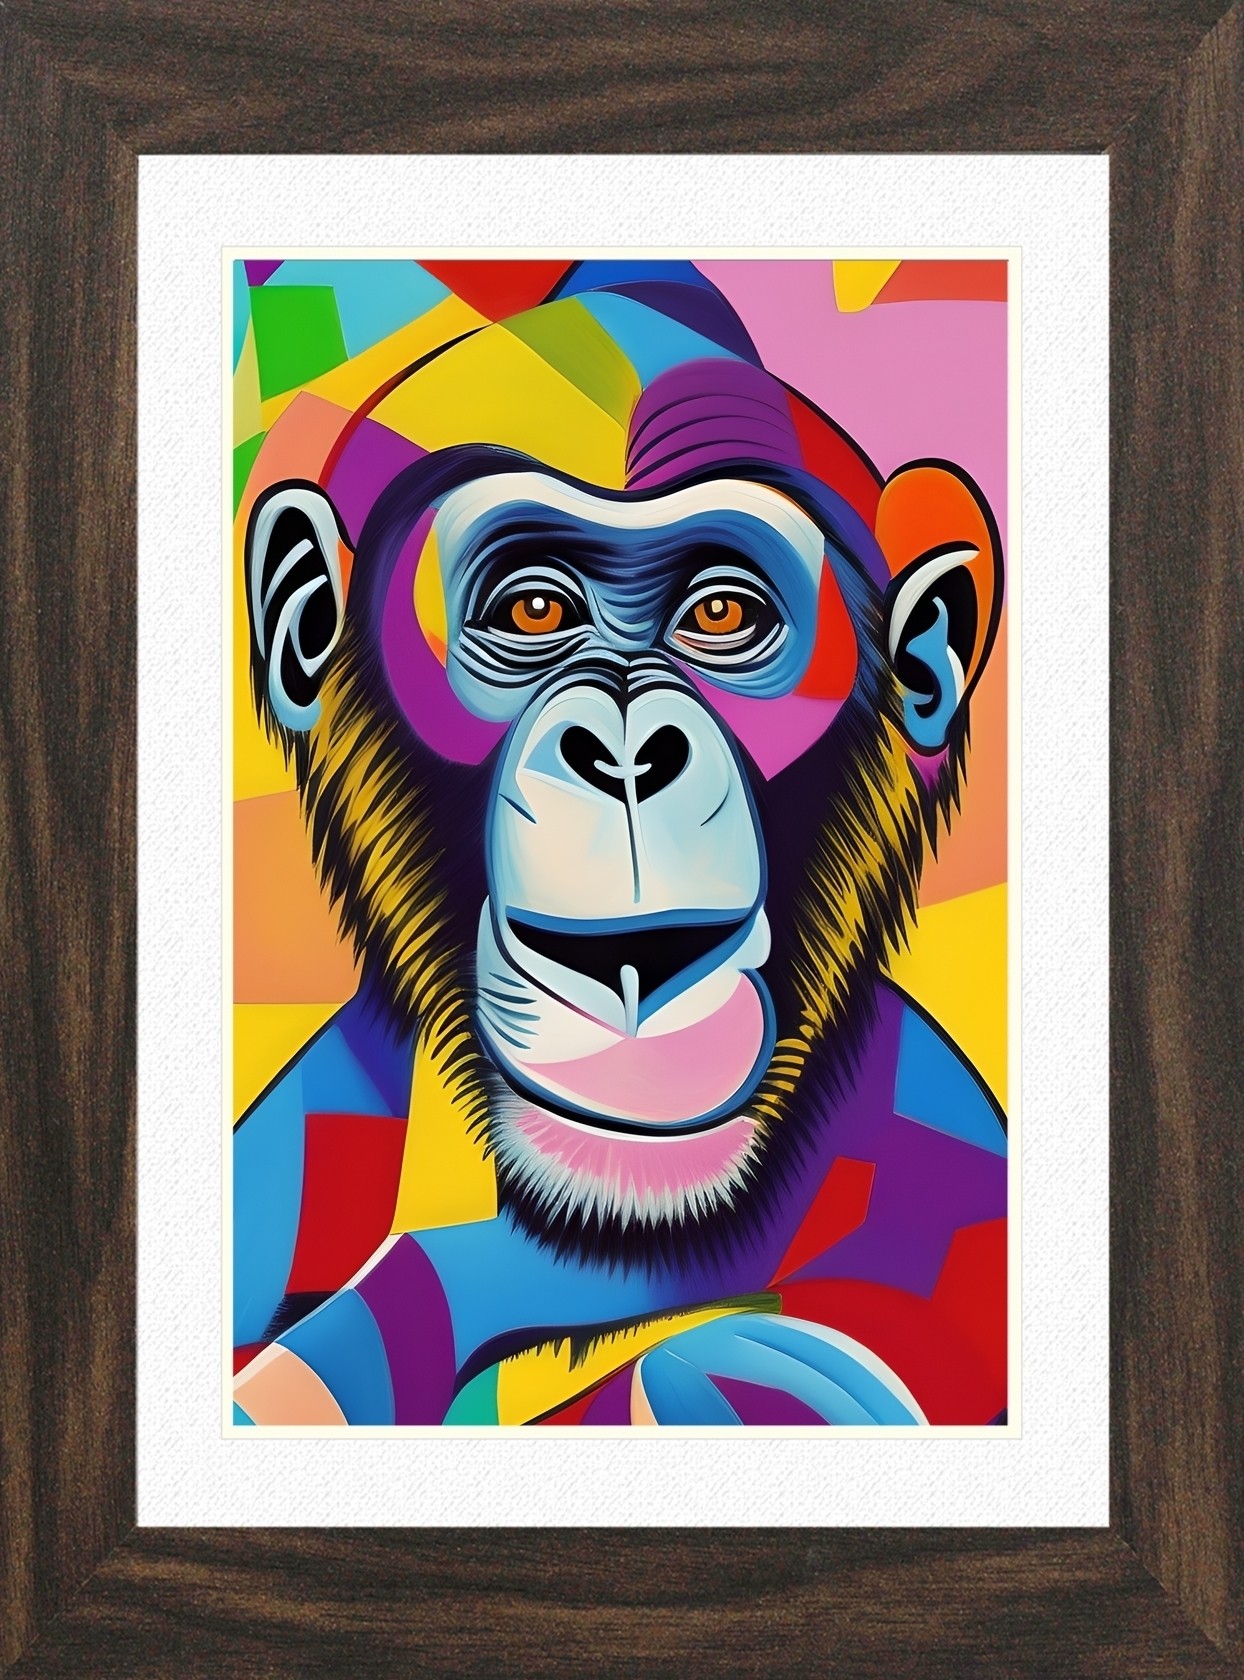 Monkey Chimpanzee Animal Picture Framed Colourful Abstract Art (25cm x 20cm Walnut Frame)